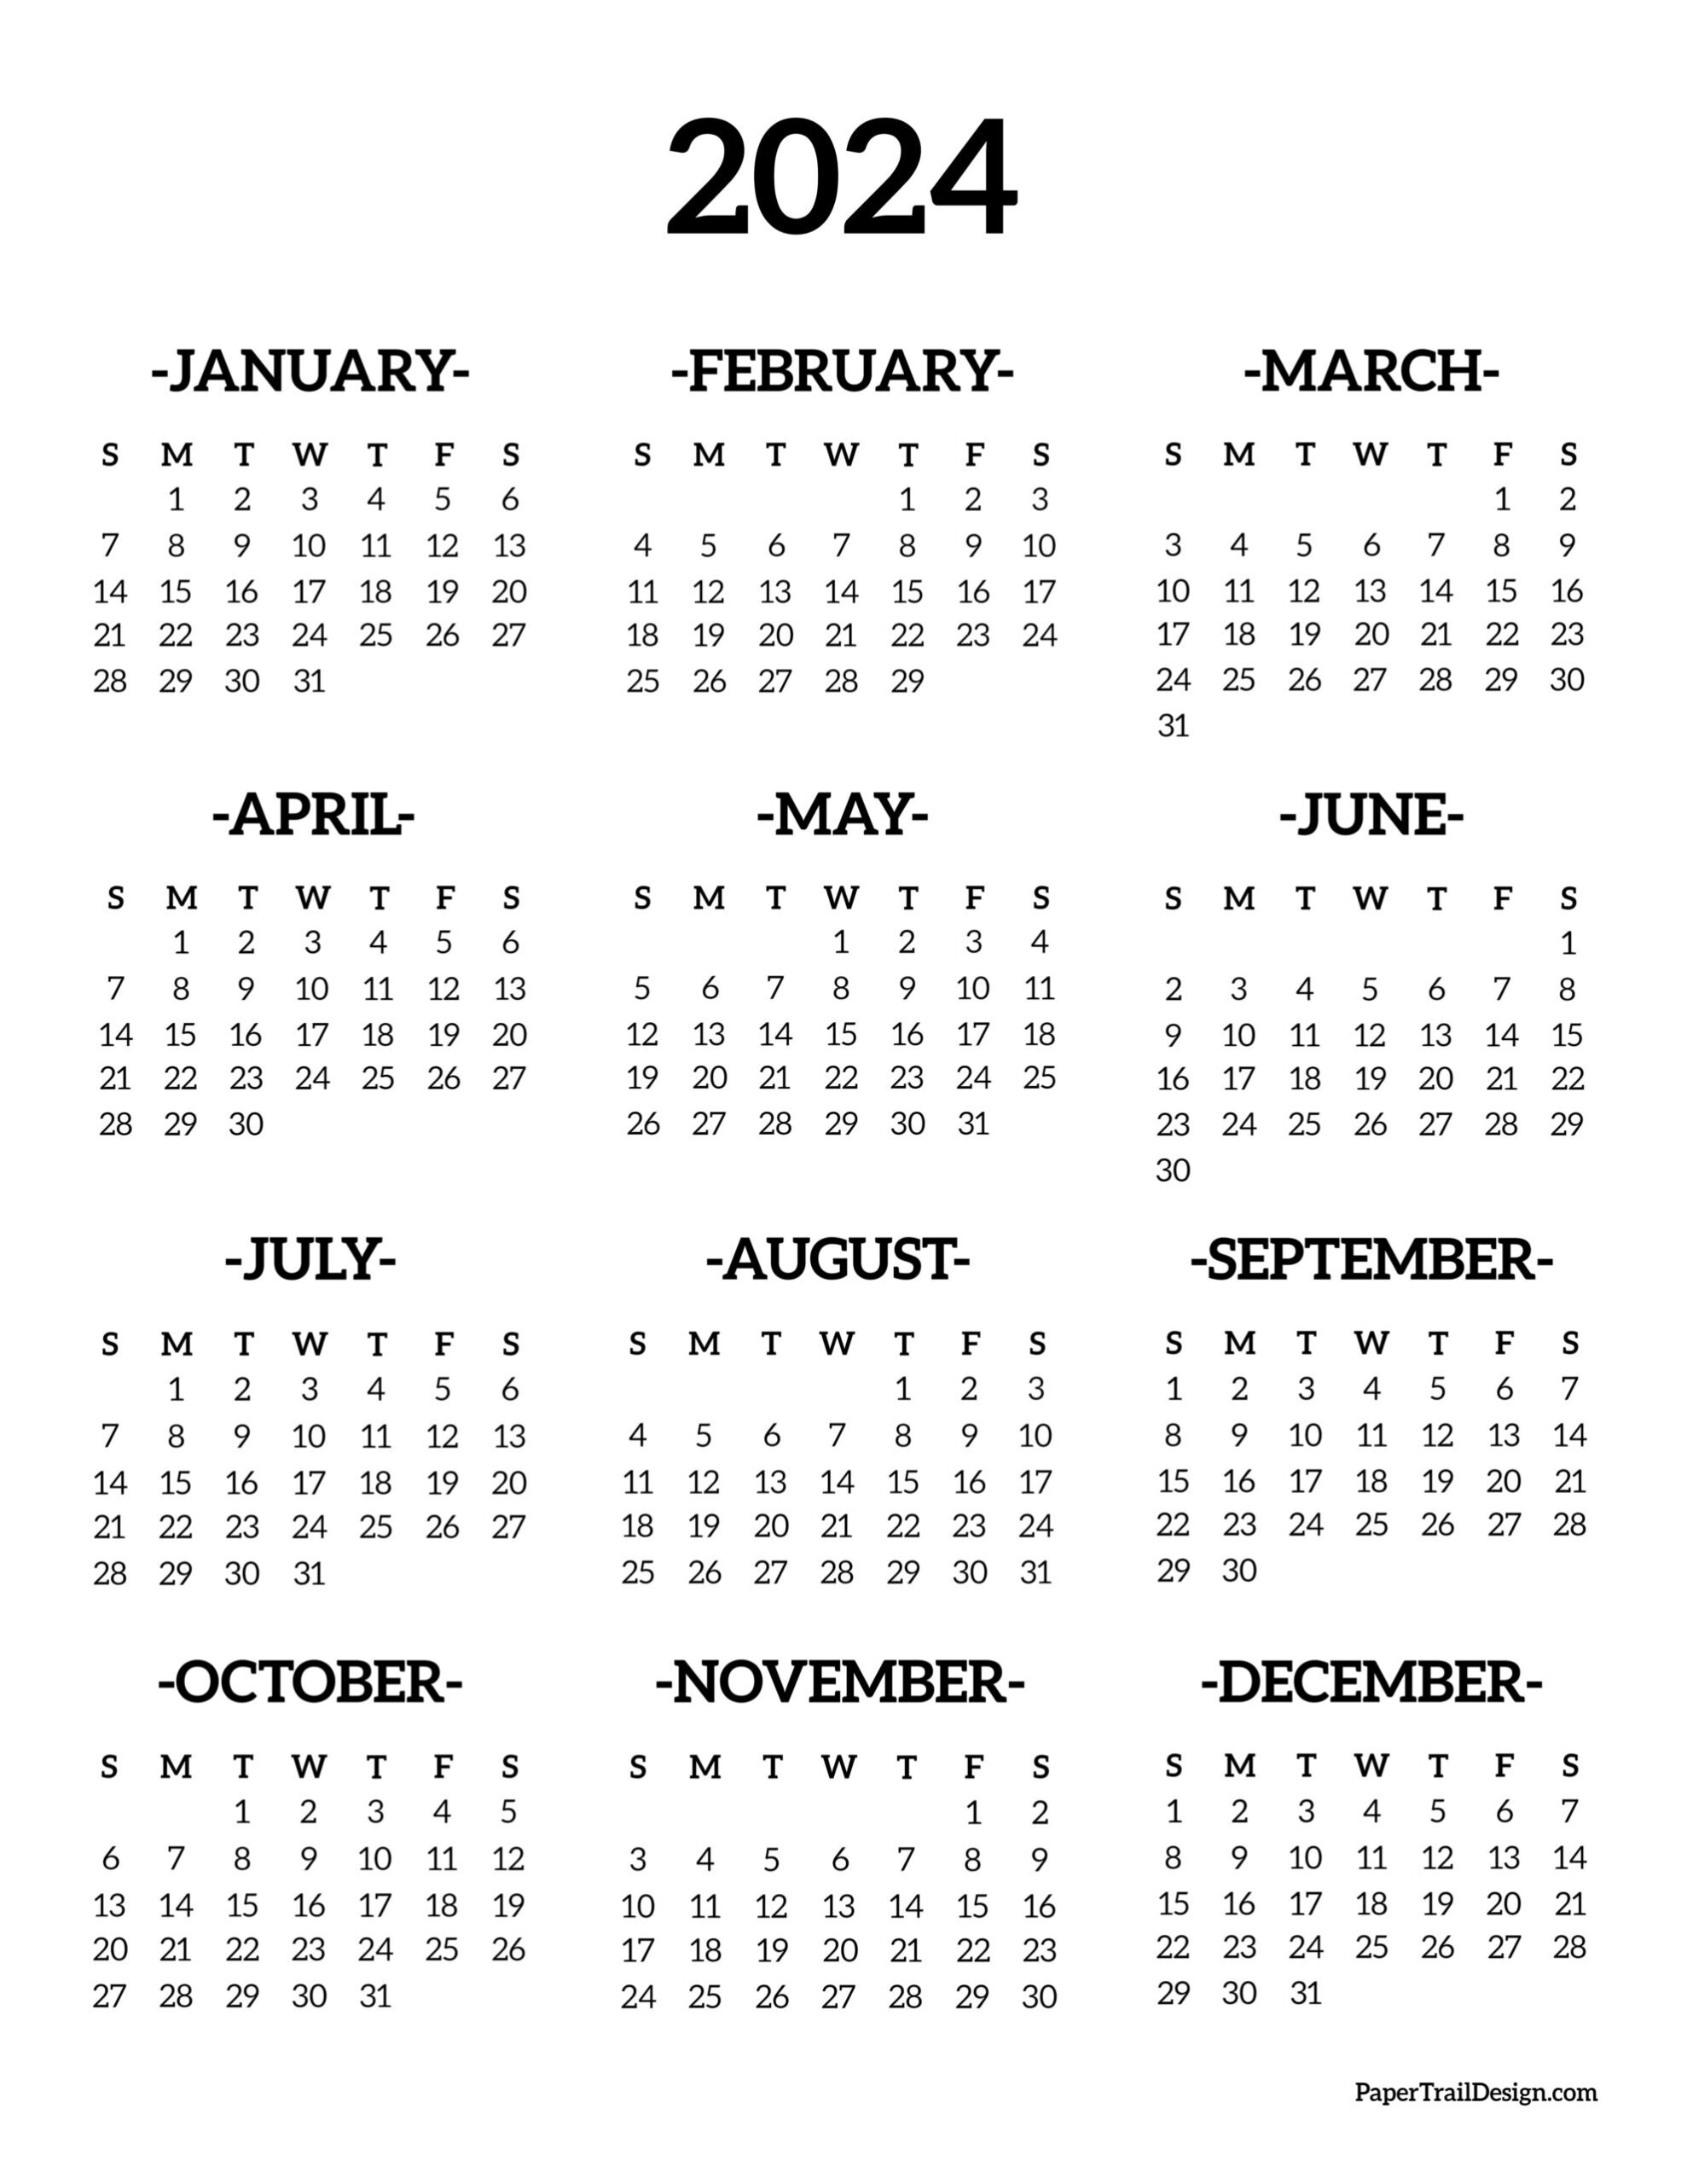 Calendar 2024 Printable One Page - Paper Trail Design | 2024 Printable Calendar One Page